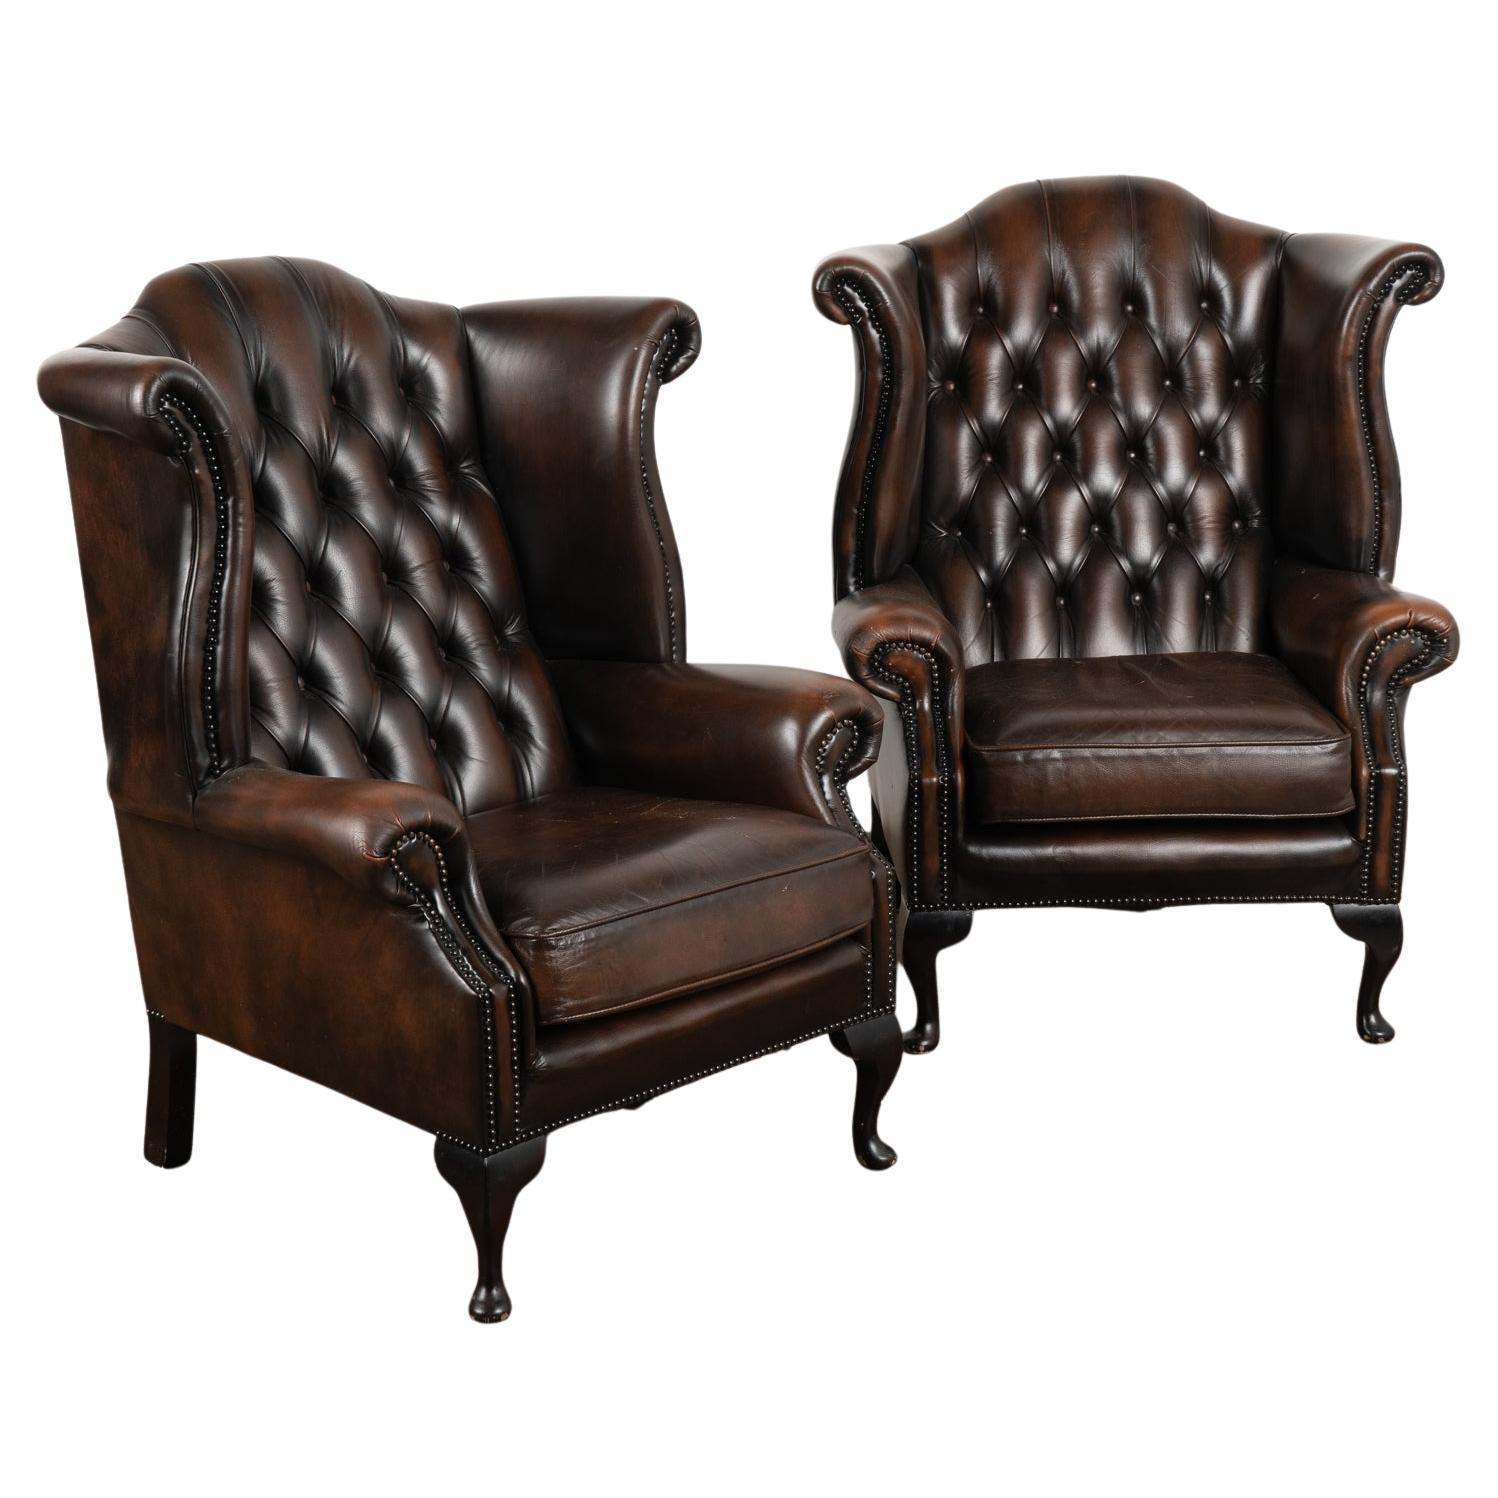 Vintage Brown Leather Wingback Chesterfield Armchairs, Denmark circa 1960-70